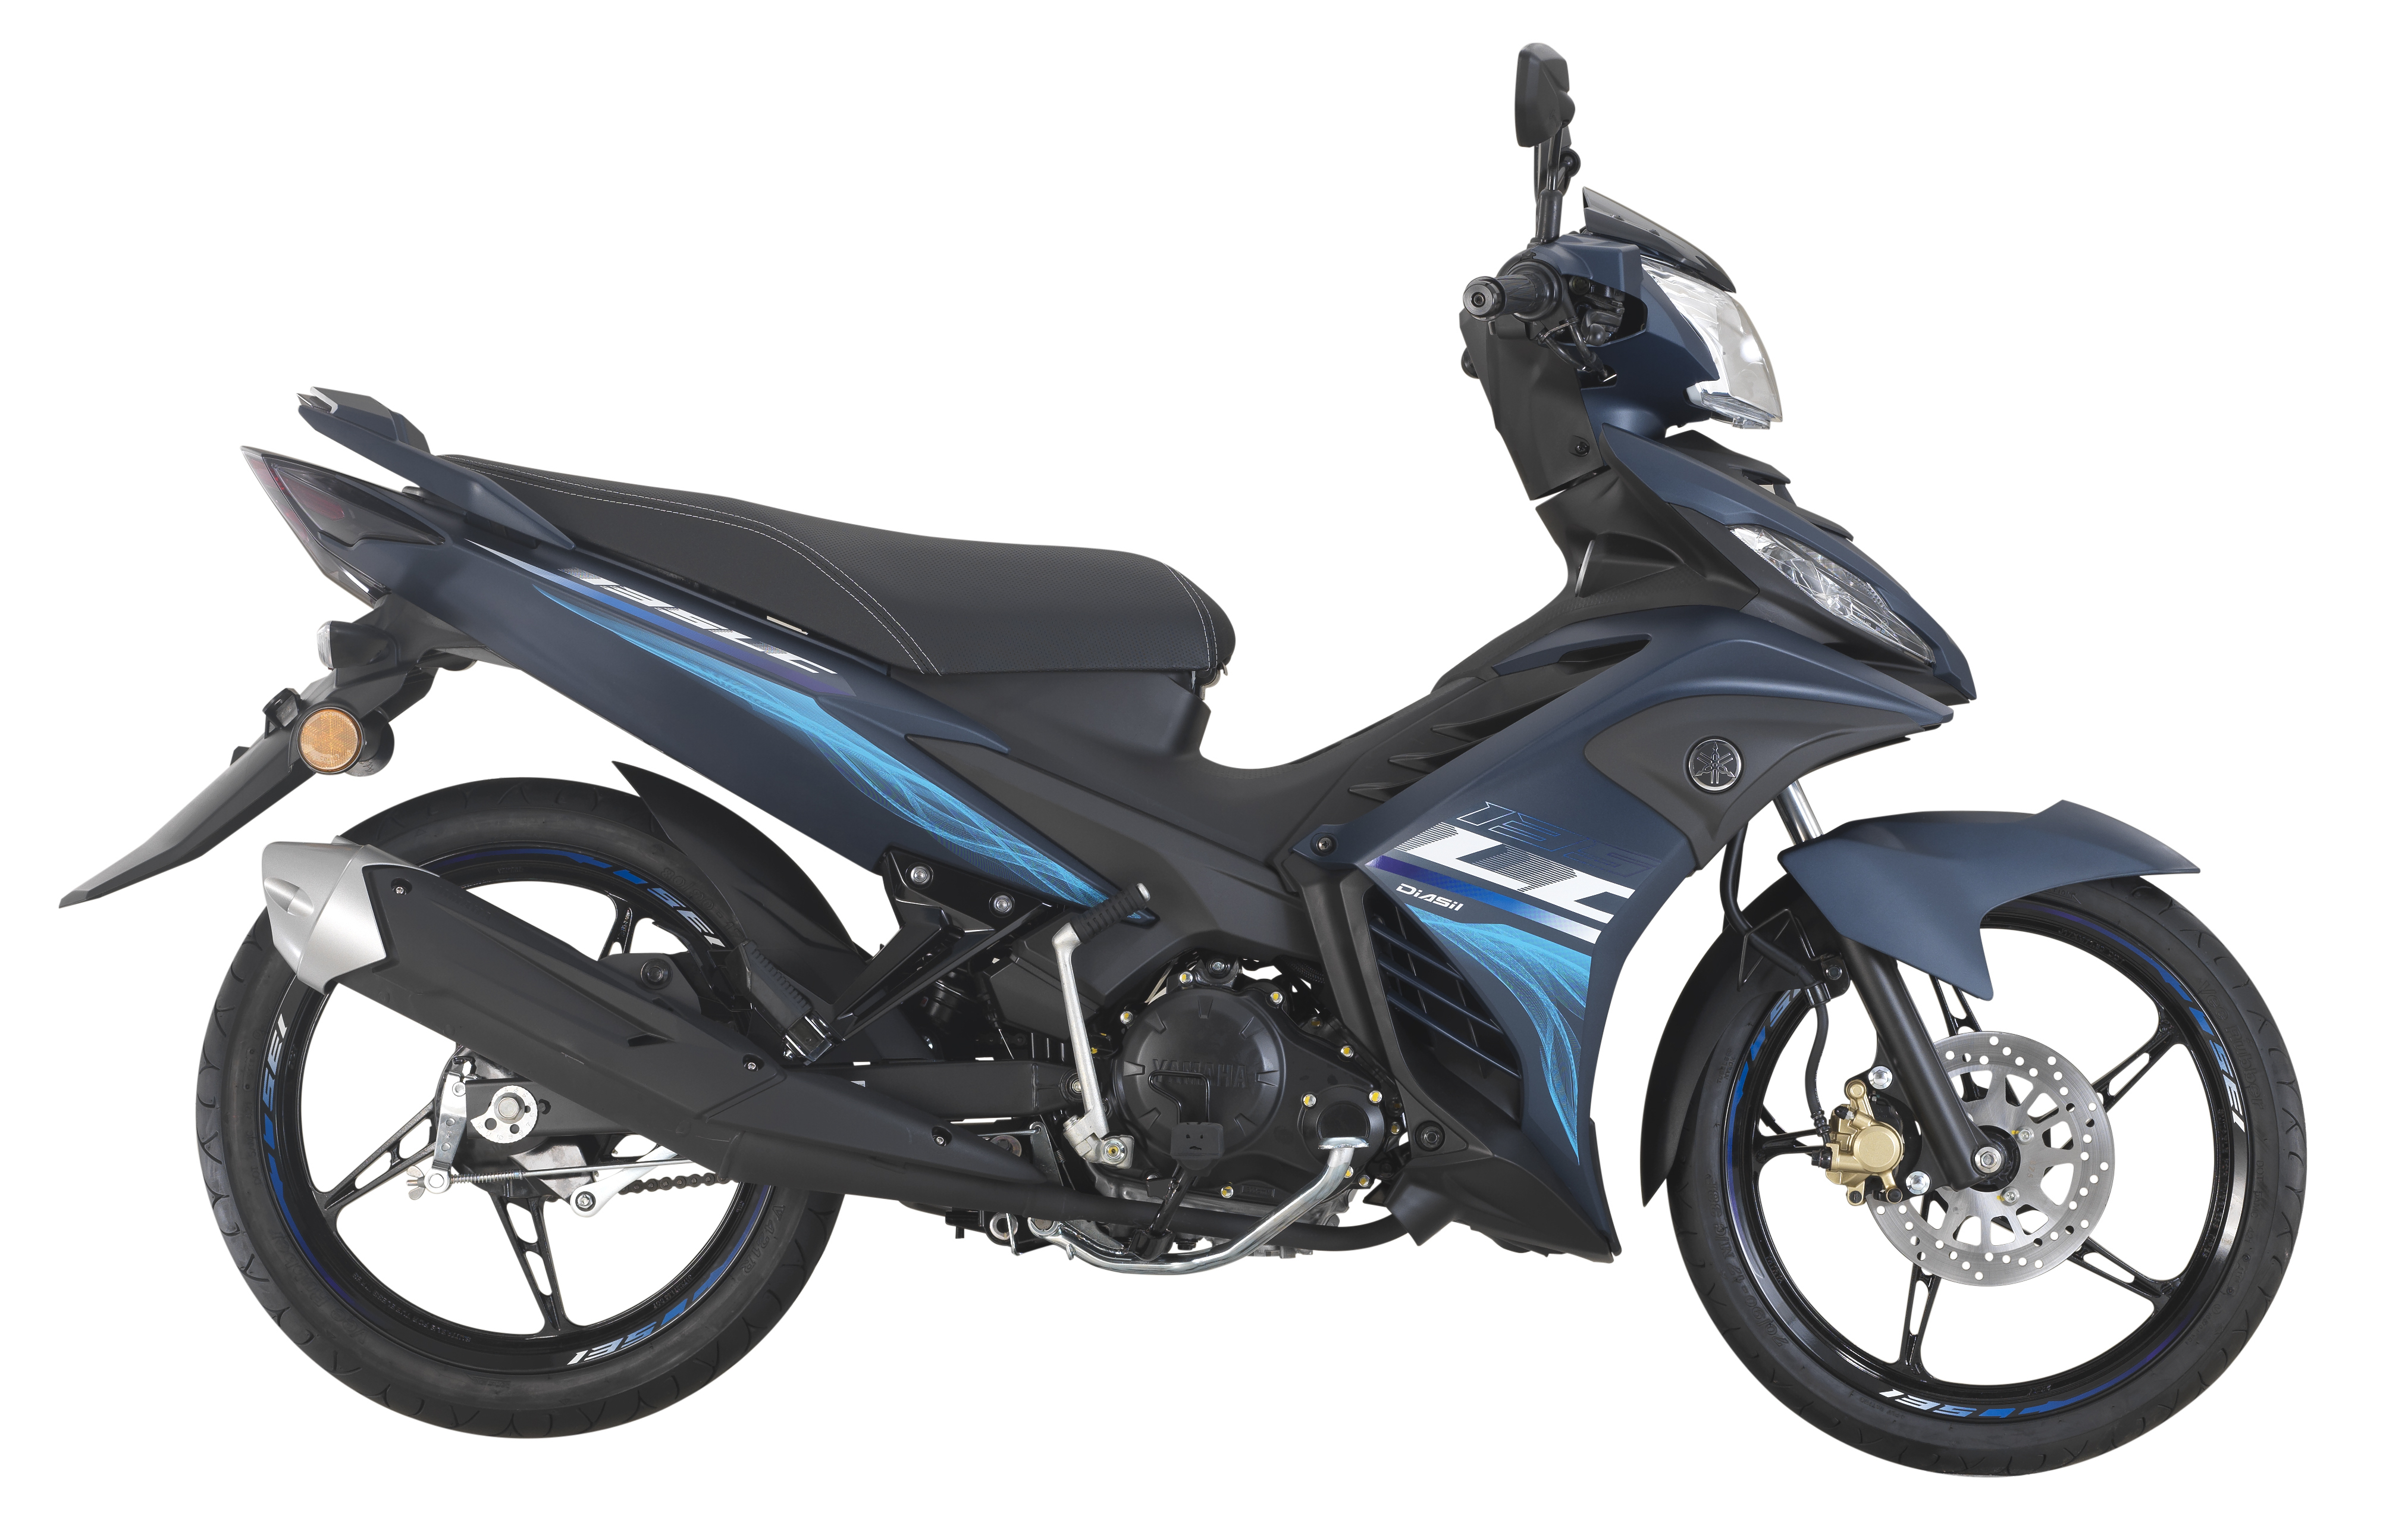 2019 Yamaha 135LC SE updated, priced at RM7,118 2019 ...